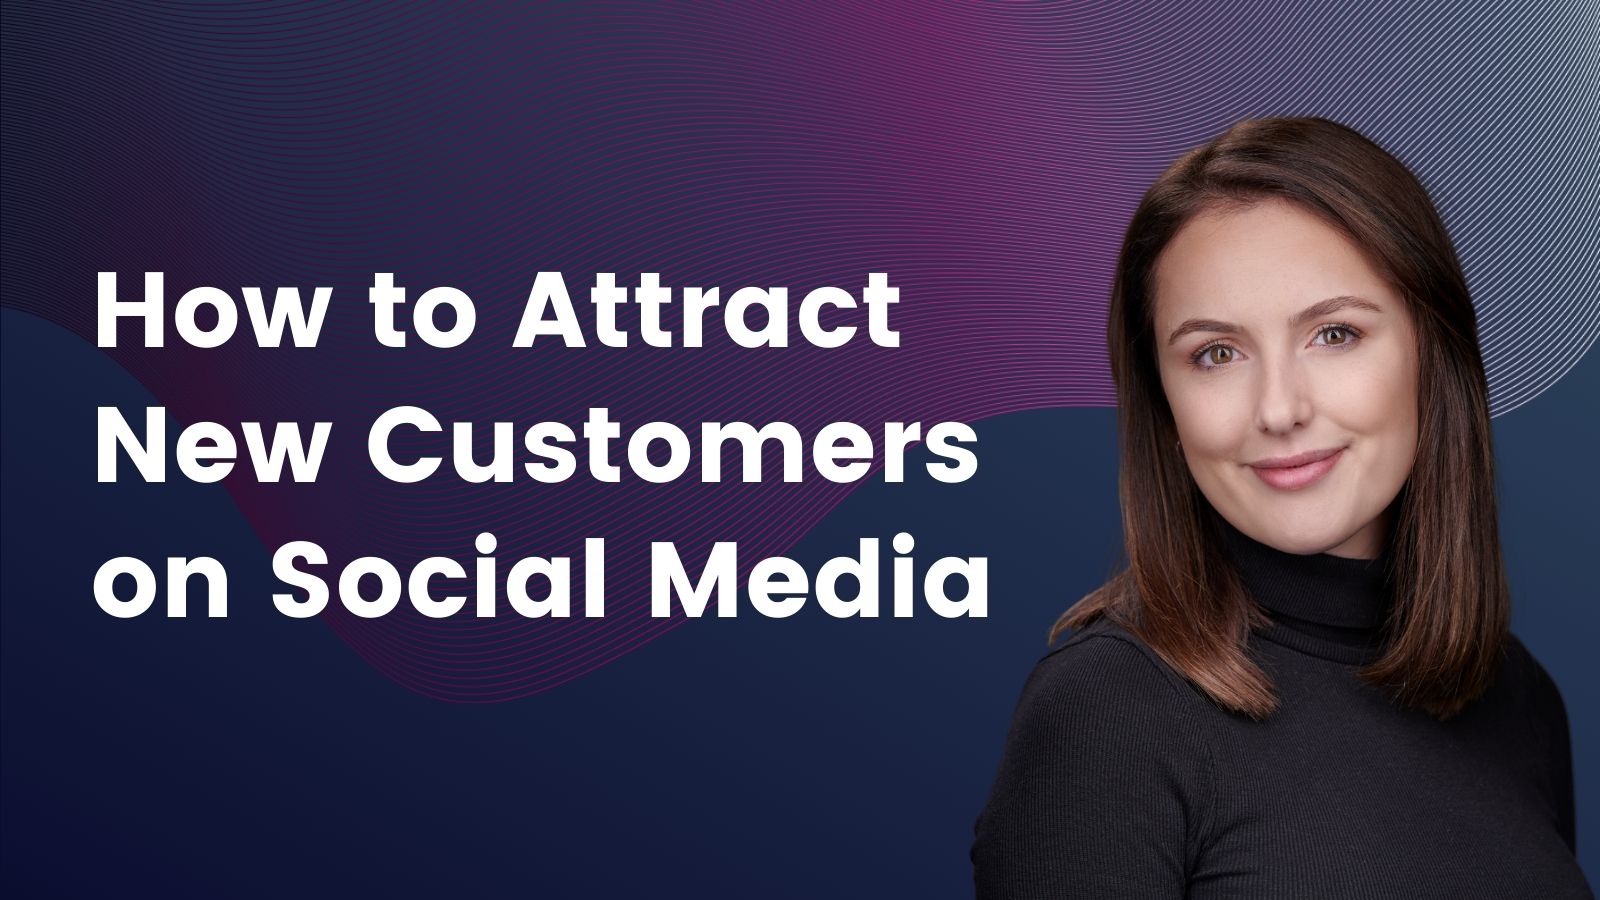 How to Attract Customers Through Effective Social Media Marketing?